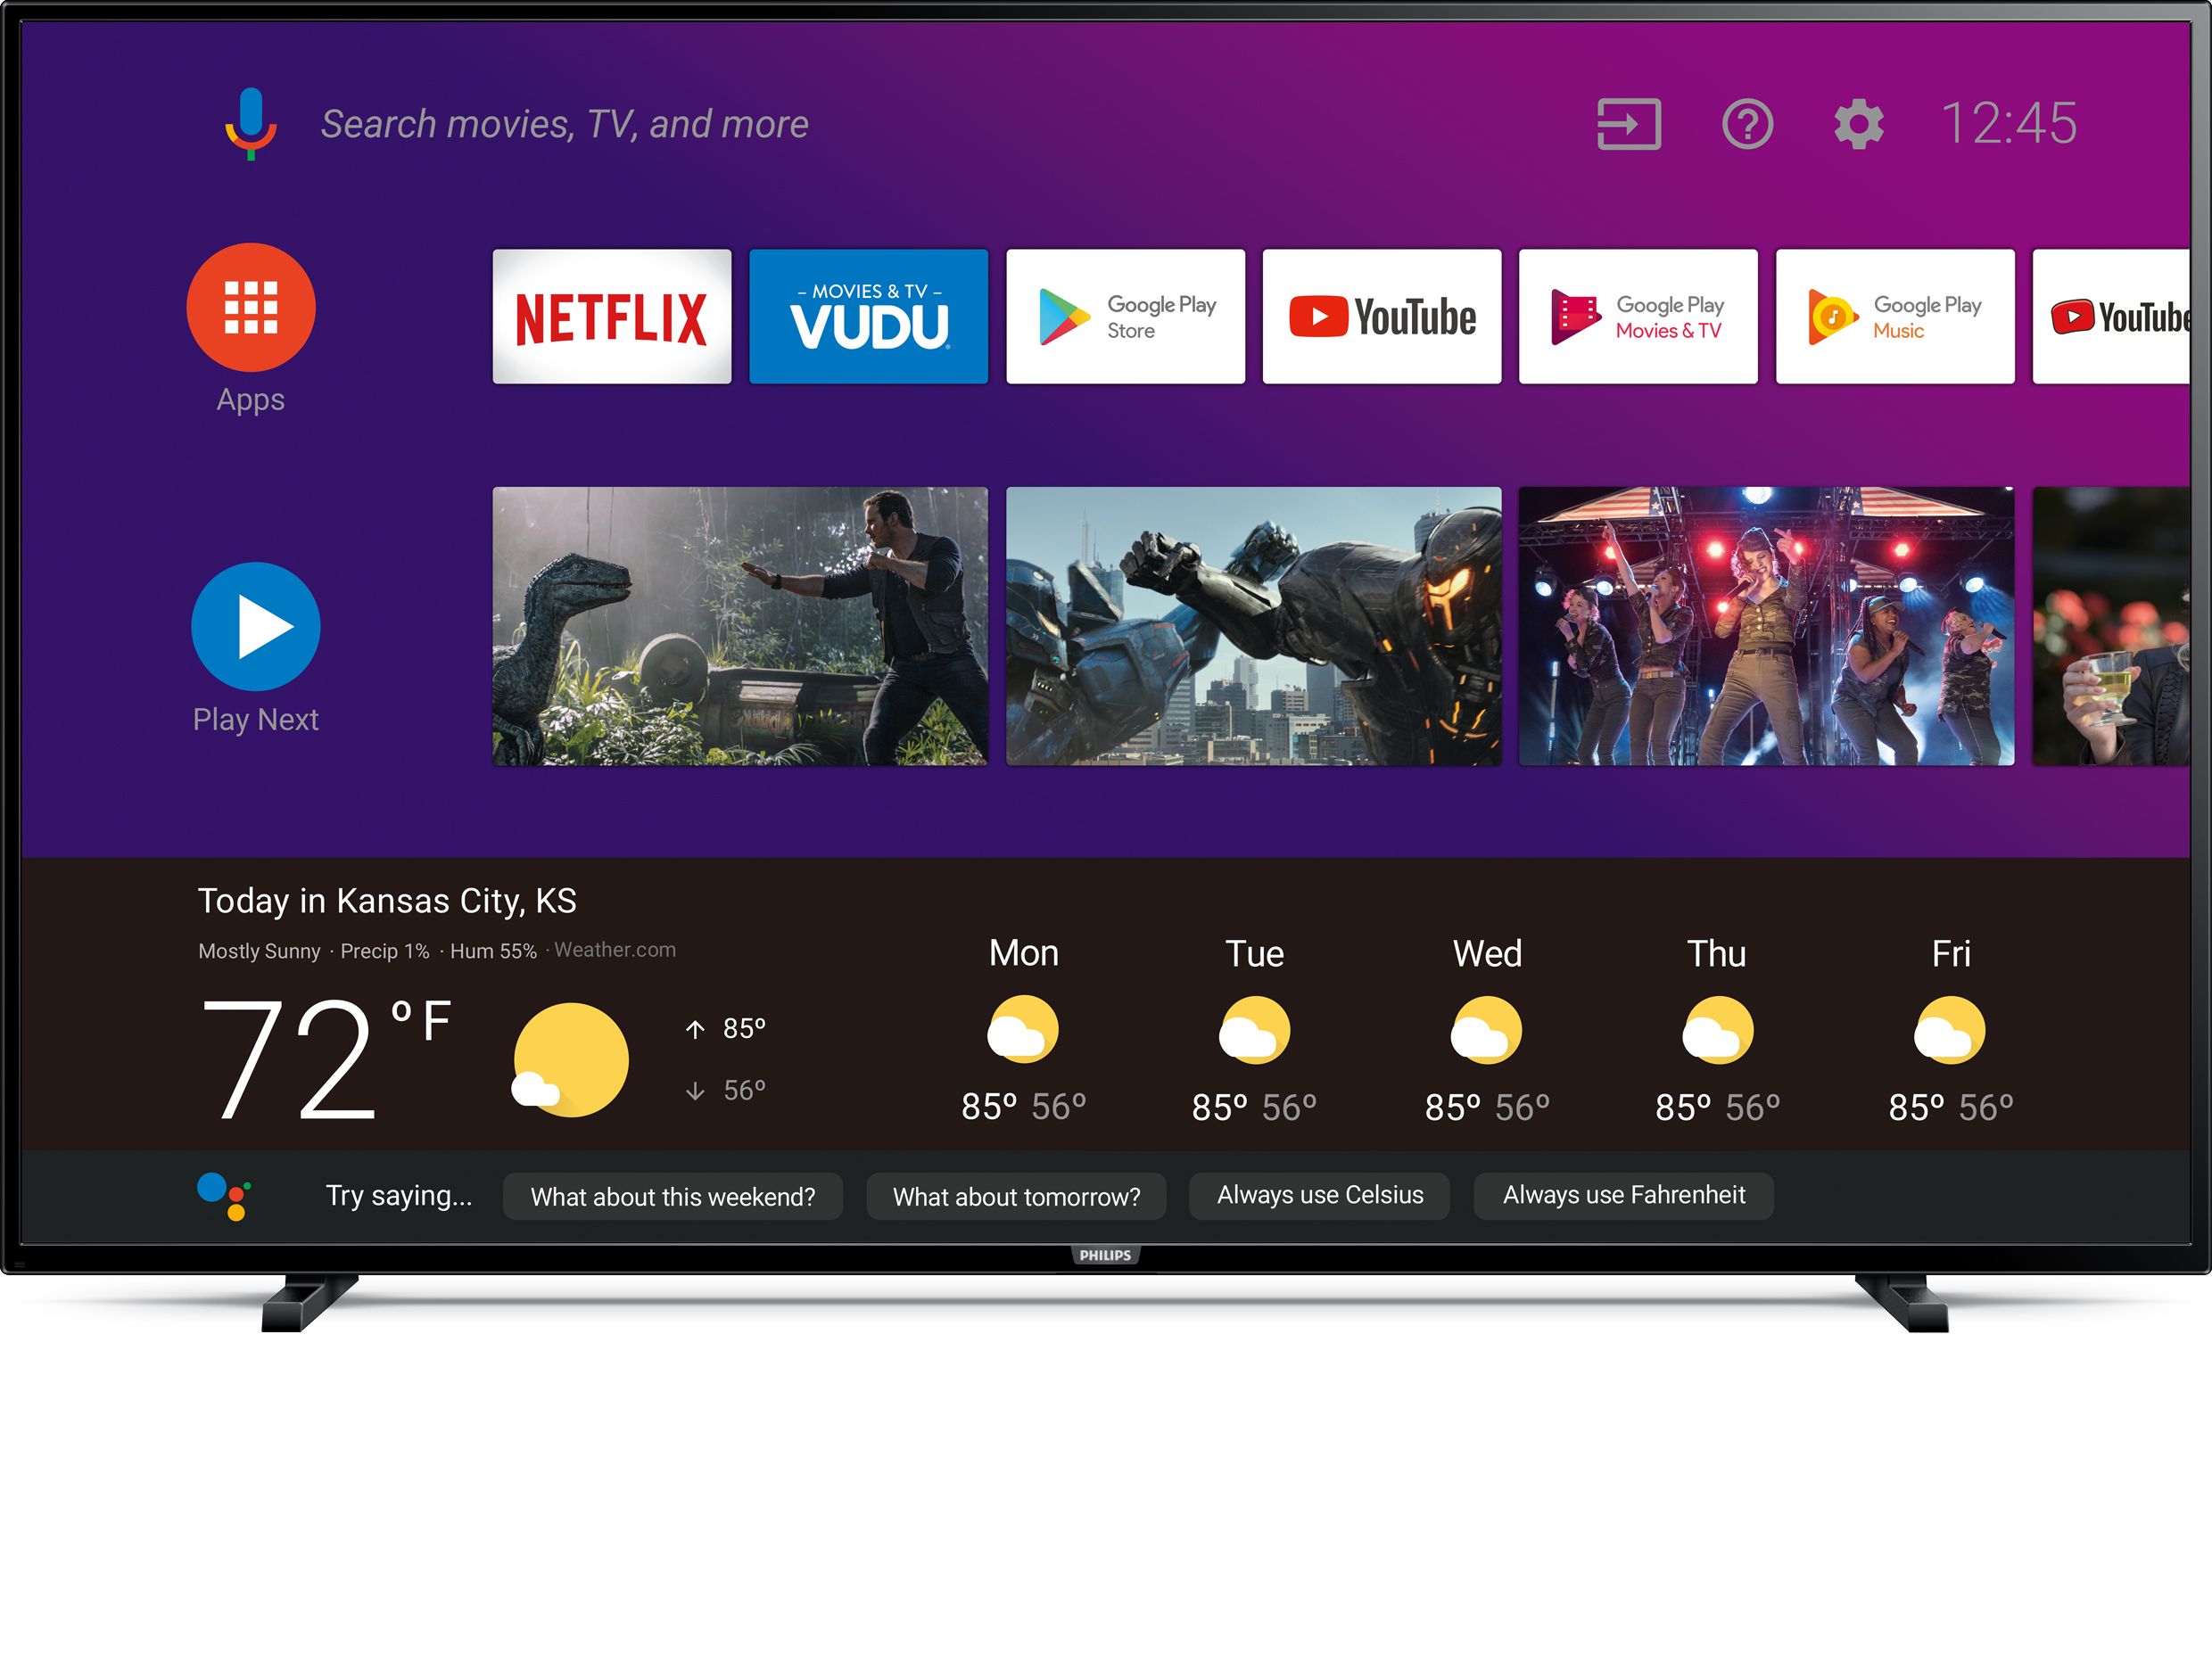 Philips 65" Class 4K Ultra HD (2160p) Android Smart LED TV (65PFL5504/F7) - image 1 of 5